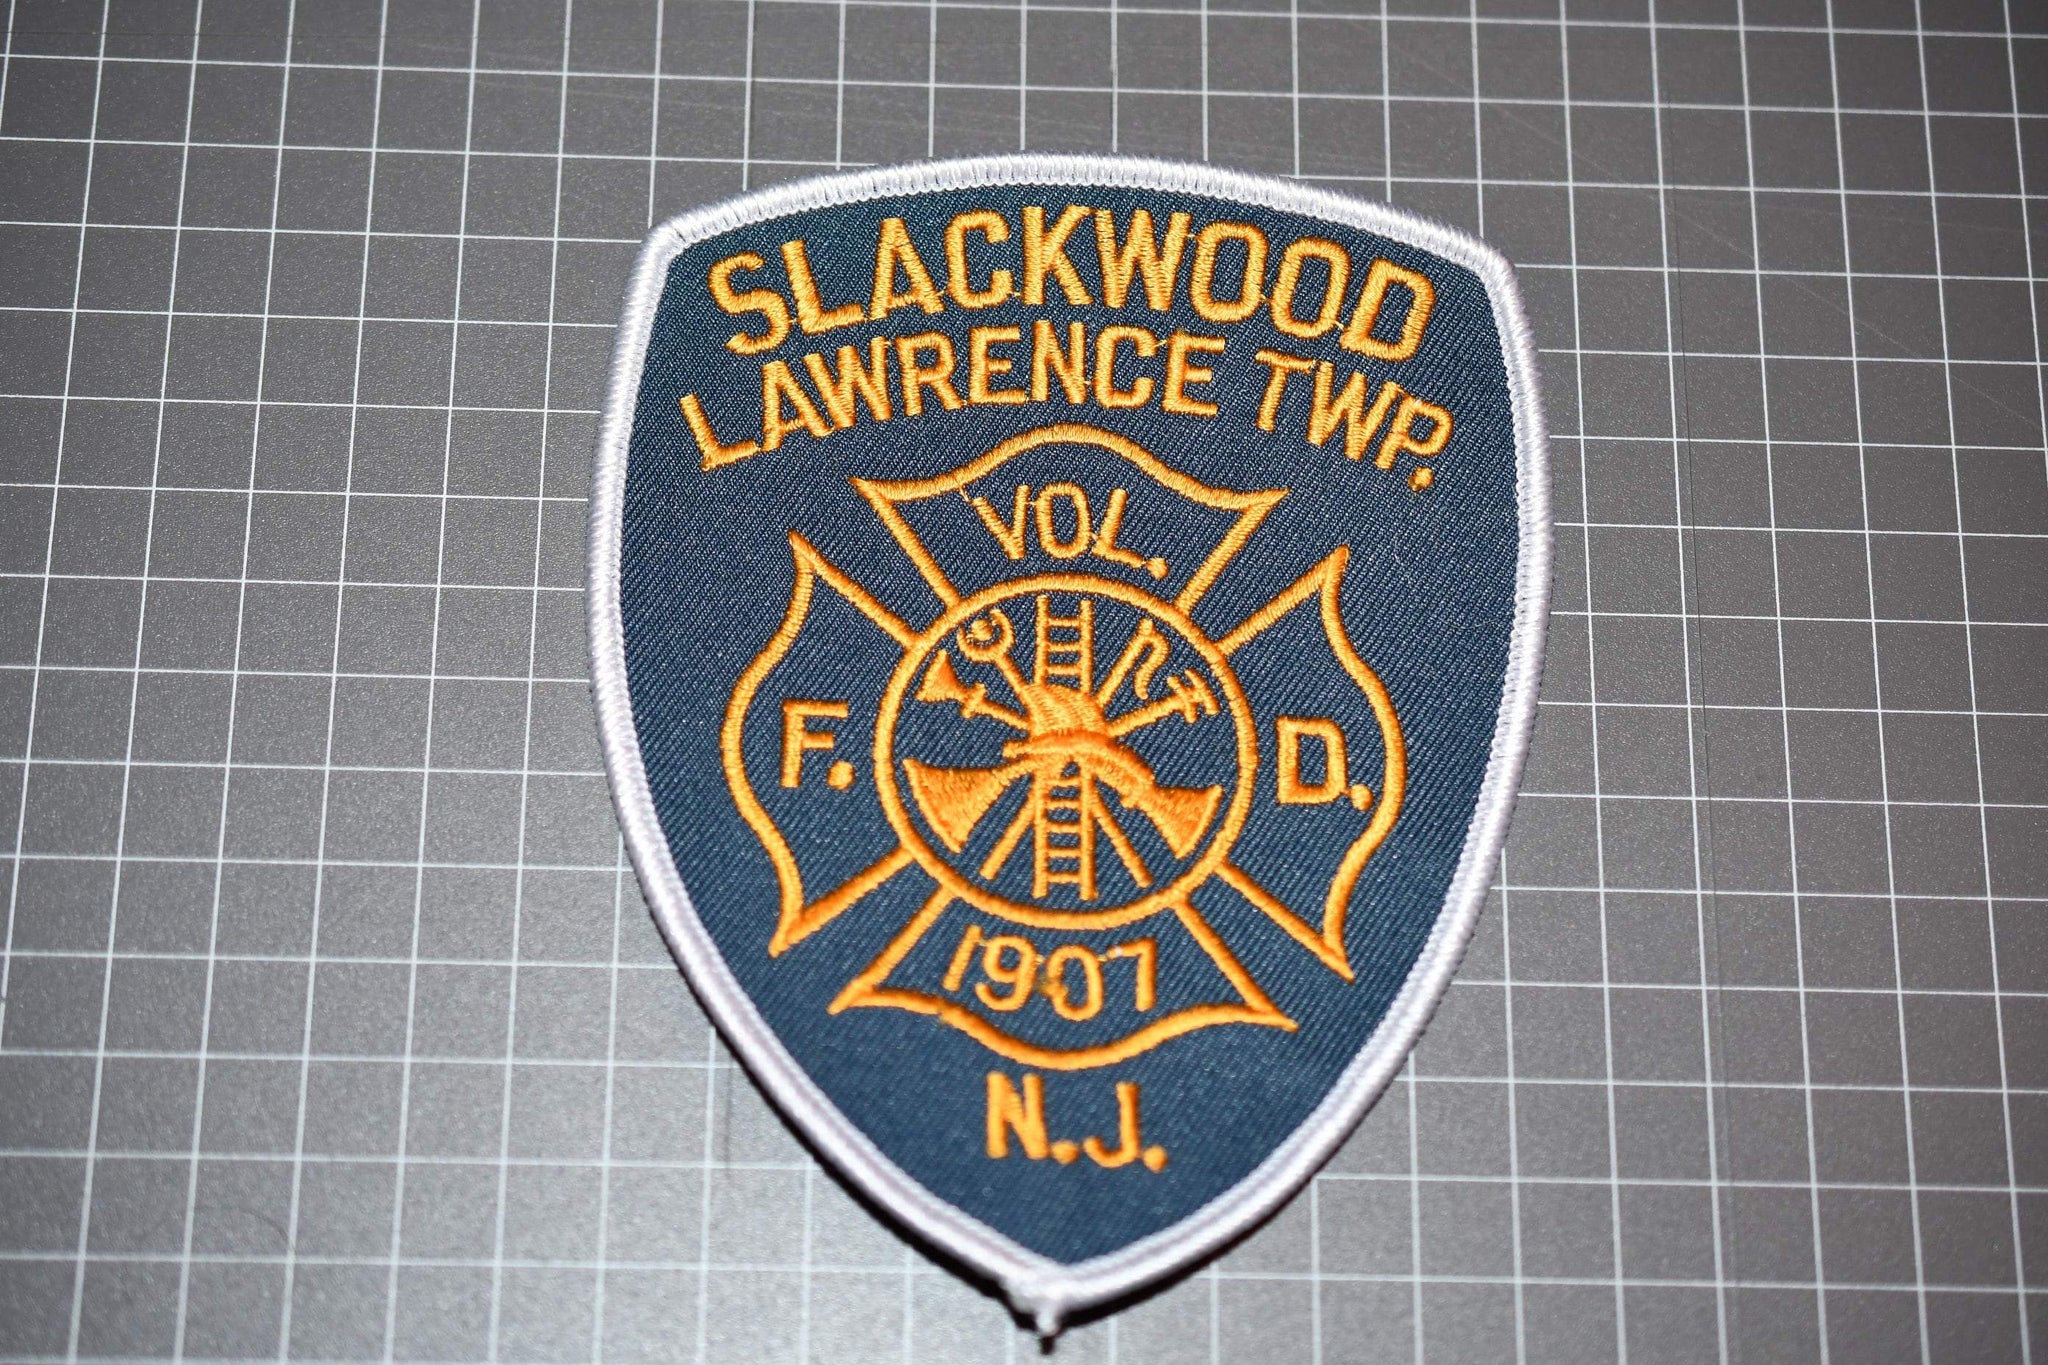 Slackwood Lawrence Township New Jersey Fire Department Patch (B1)